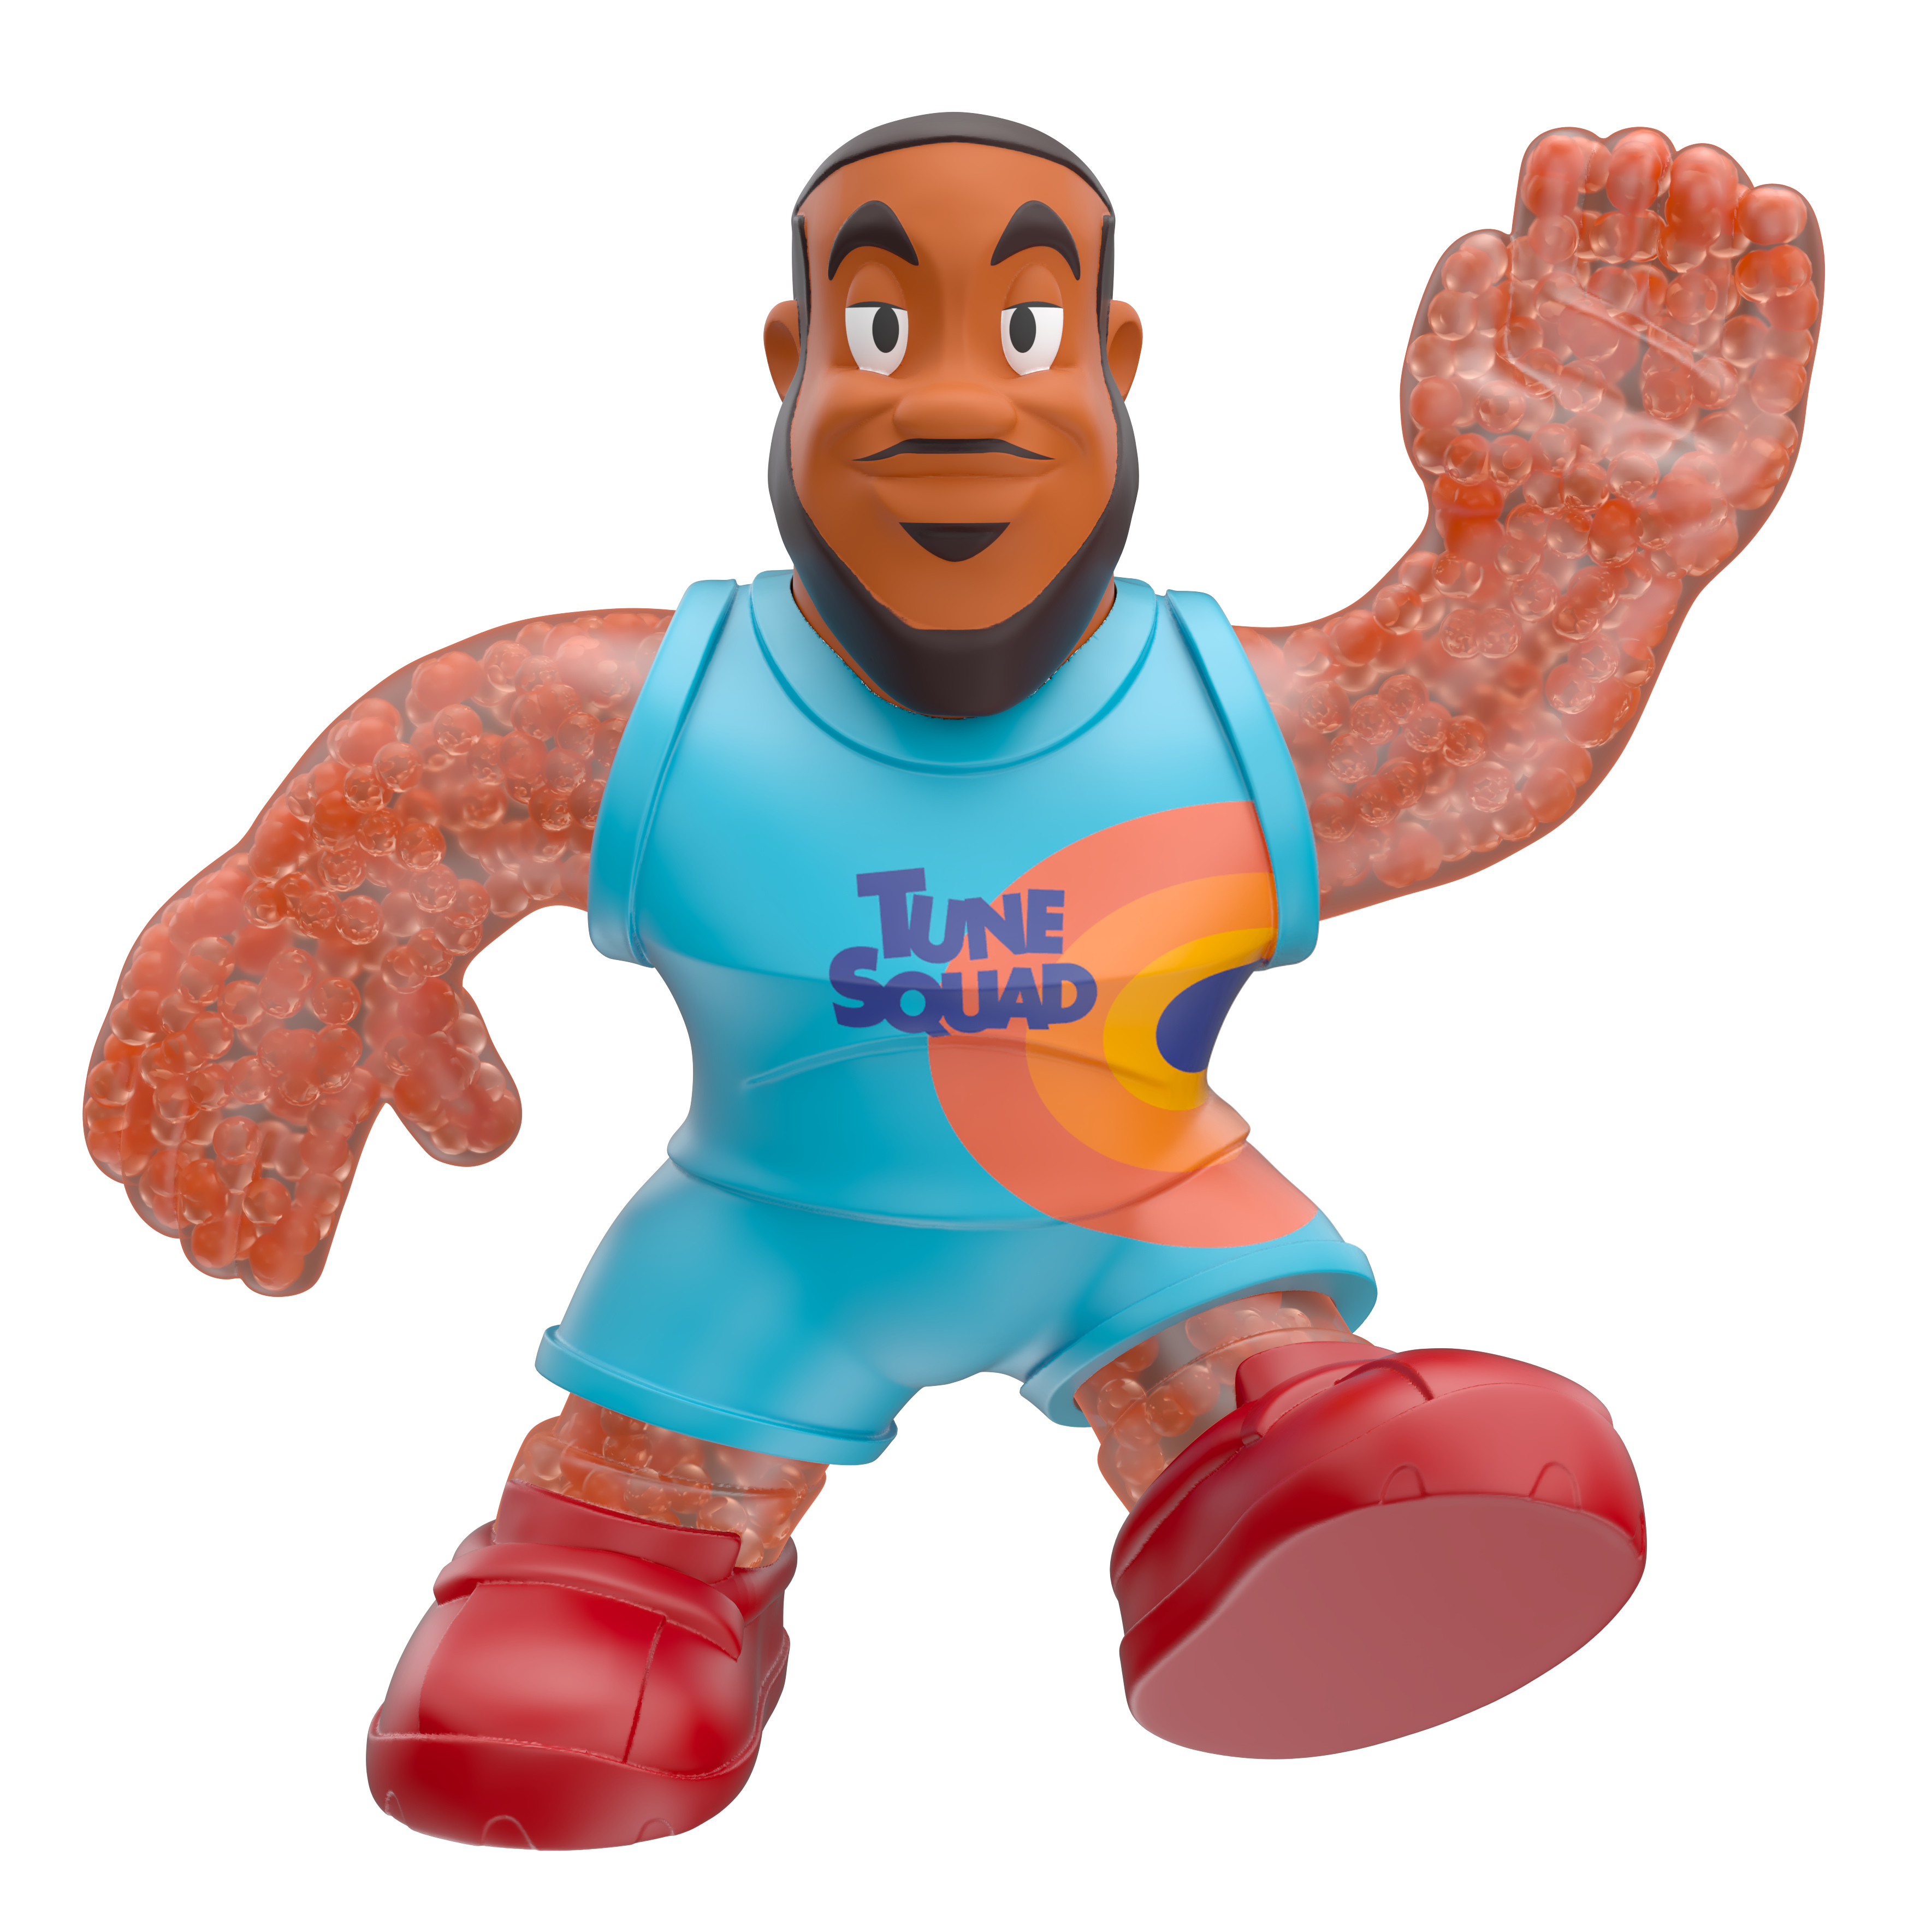 Moose Toys 14594 Space Jam: A New Legacy - 5" Stretchy Goo Filled Action Figure - Lebron James - image 1 of 10